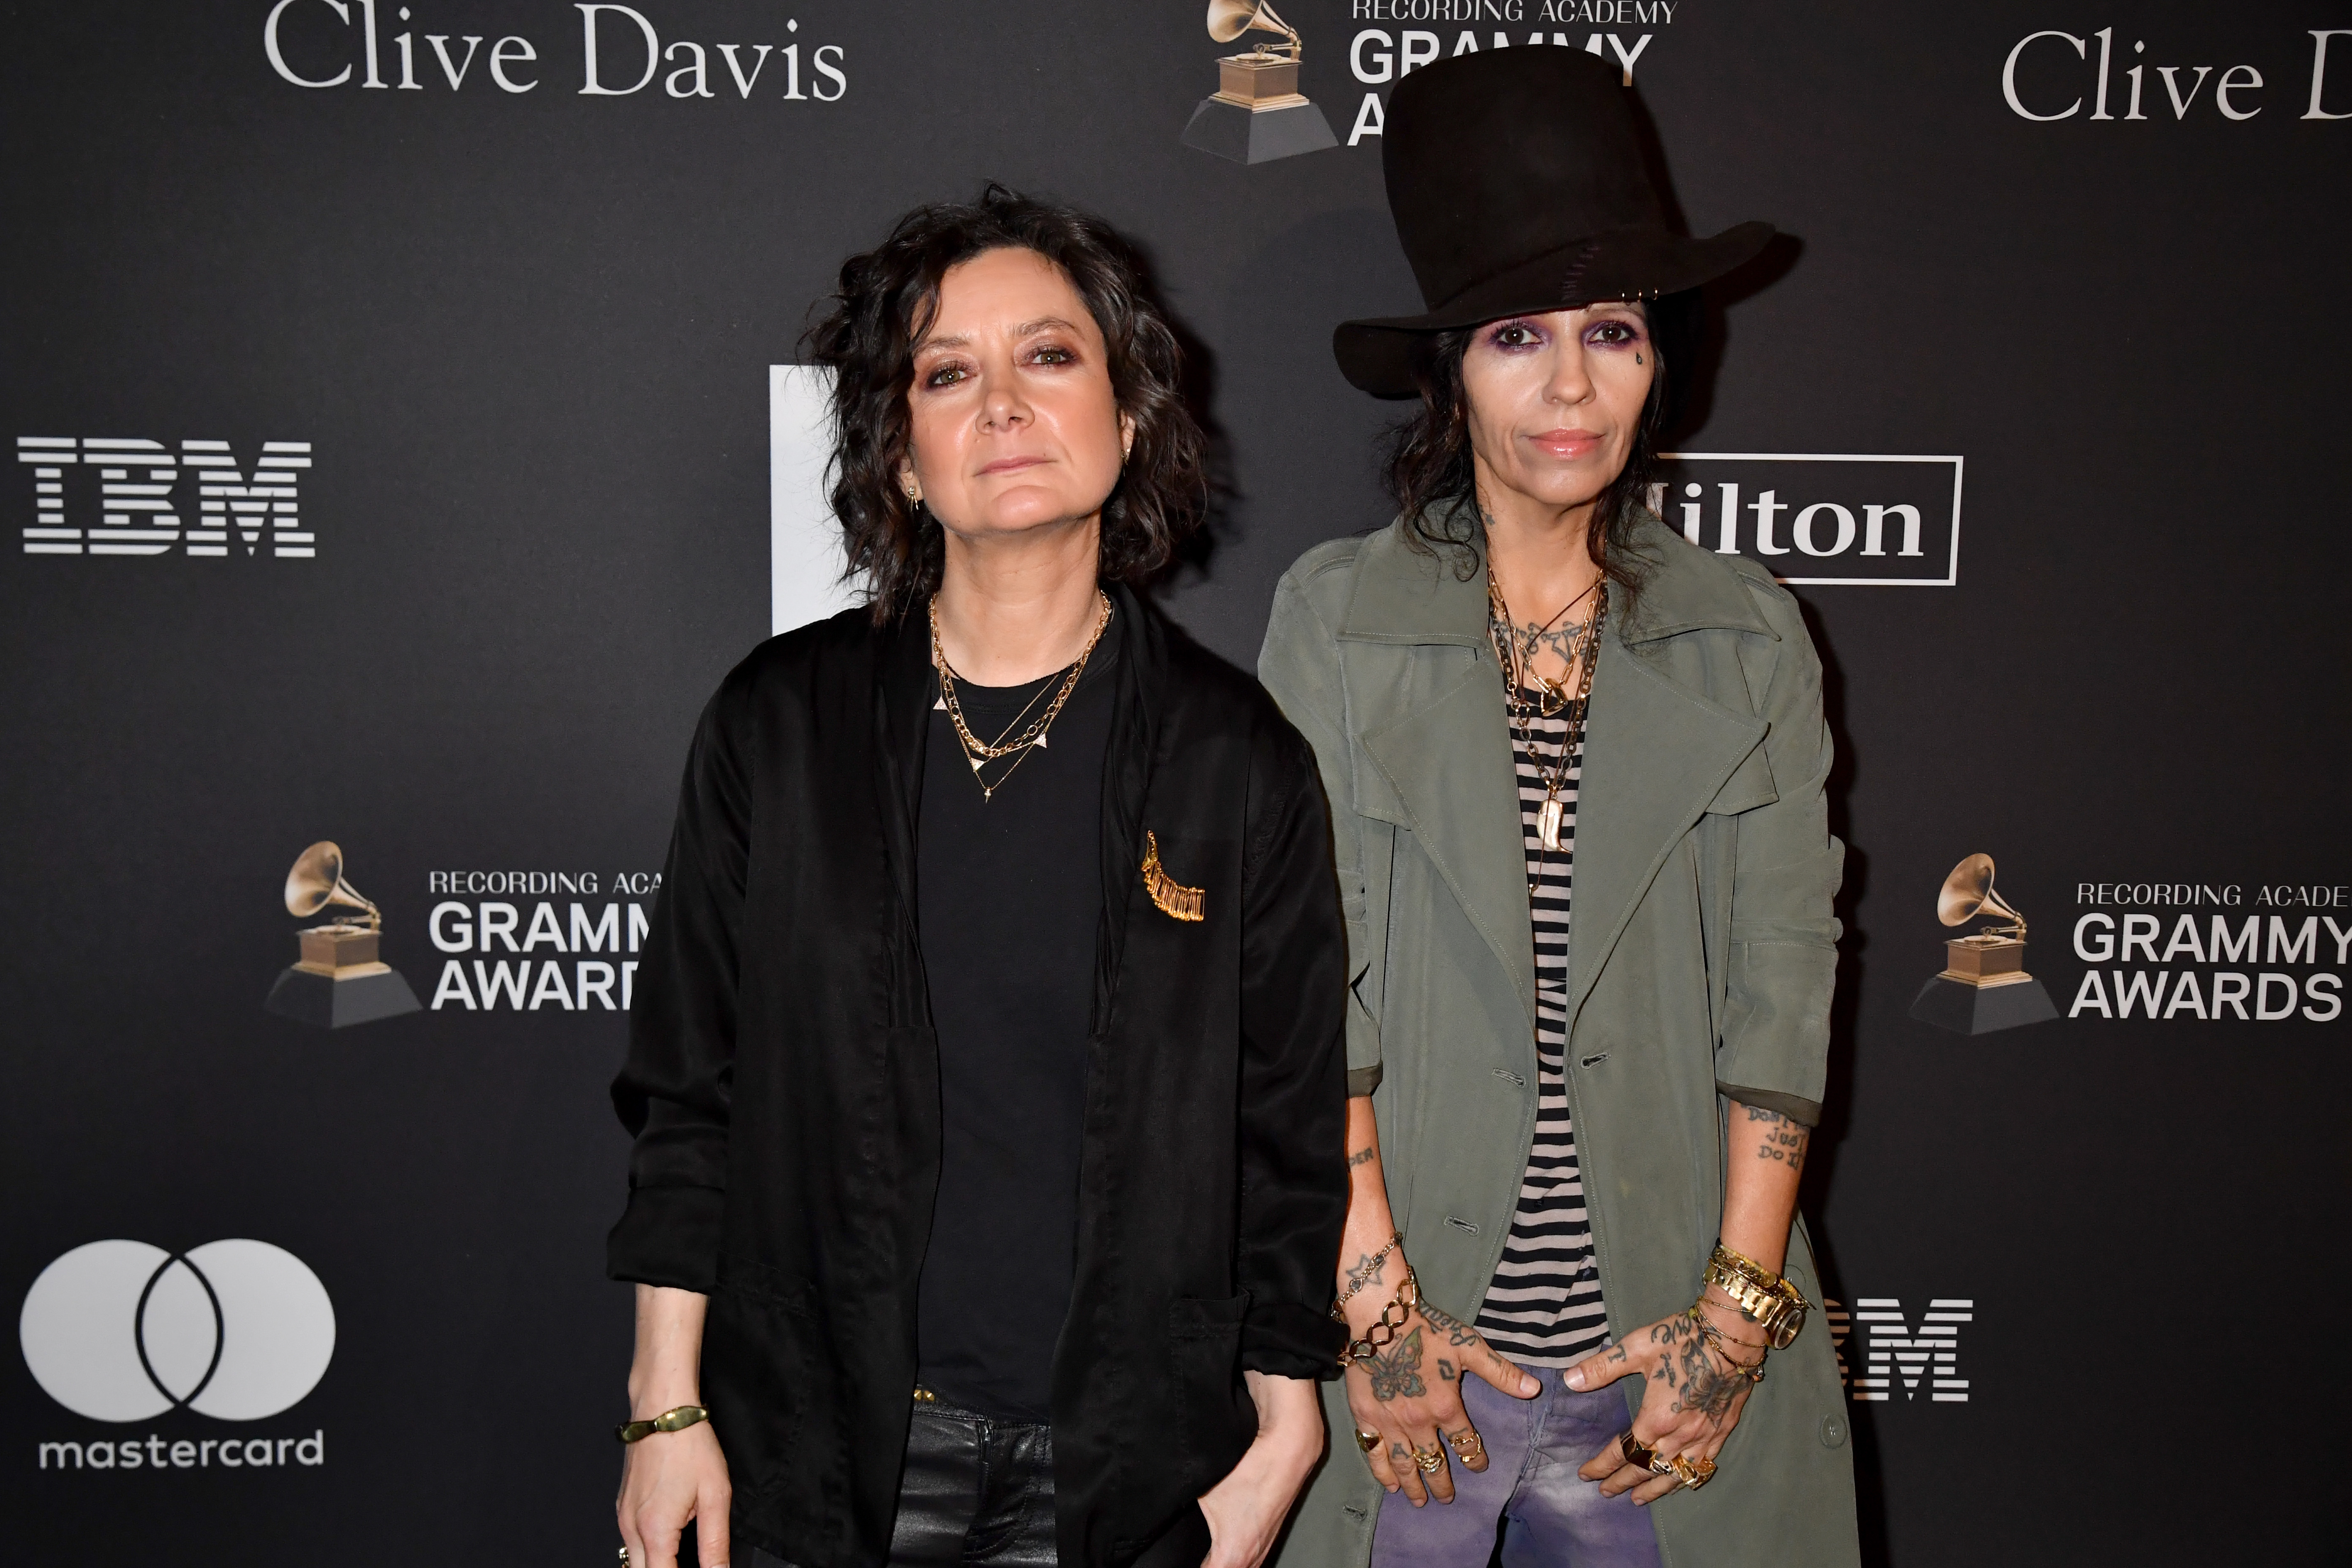 Sara Gilbert and Linda Perry at the Pre-Grammy Gala in Beverly Hills, California on February 9, 2019 | Source: Getty Images